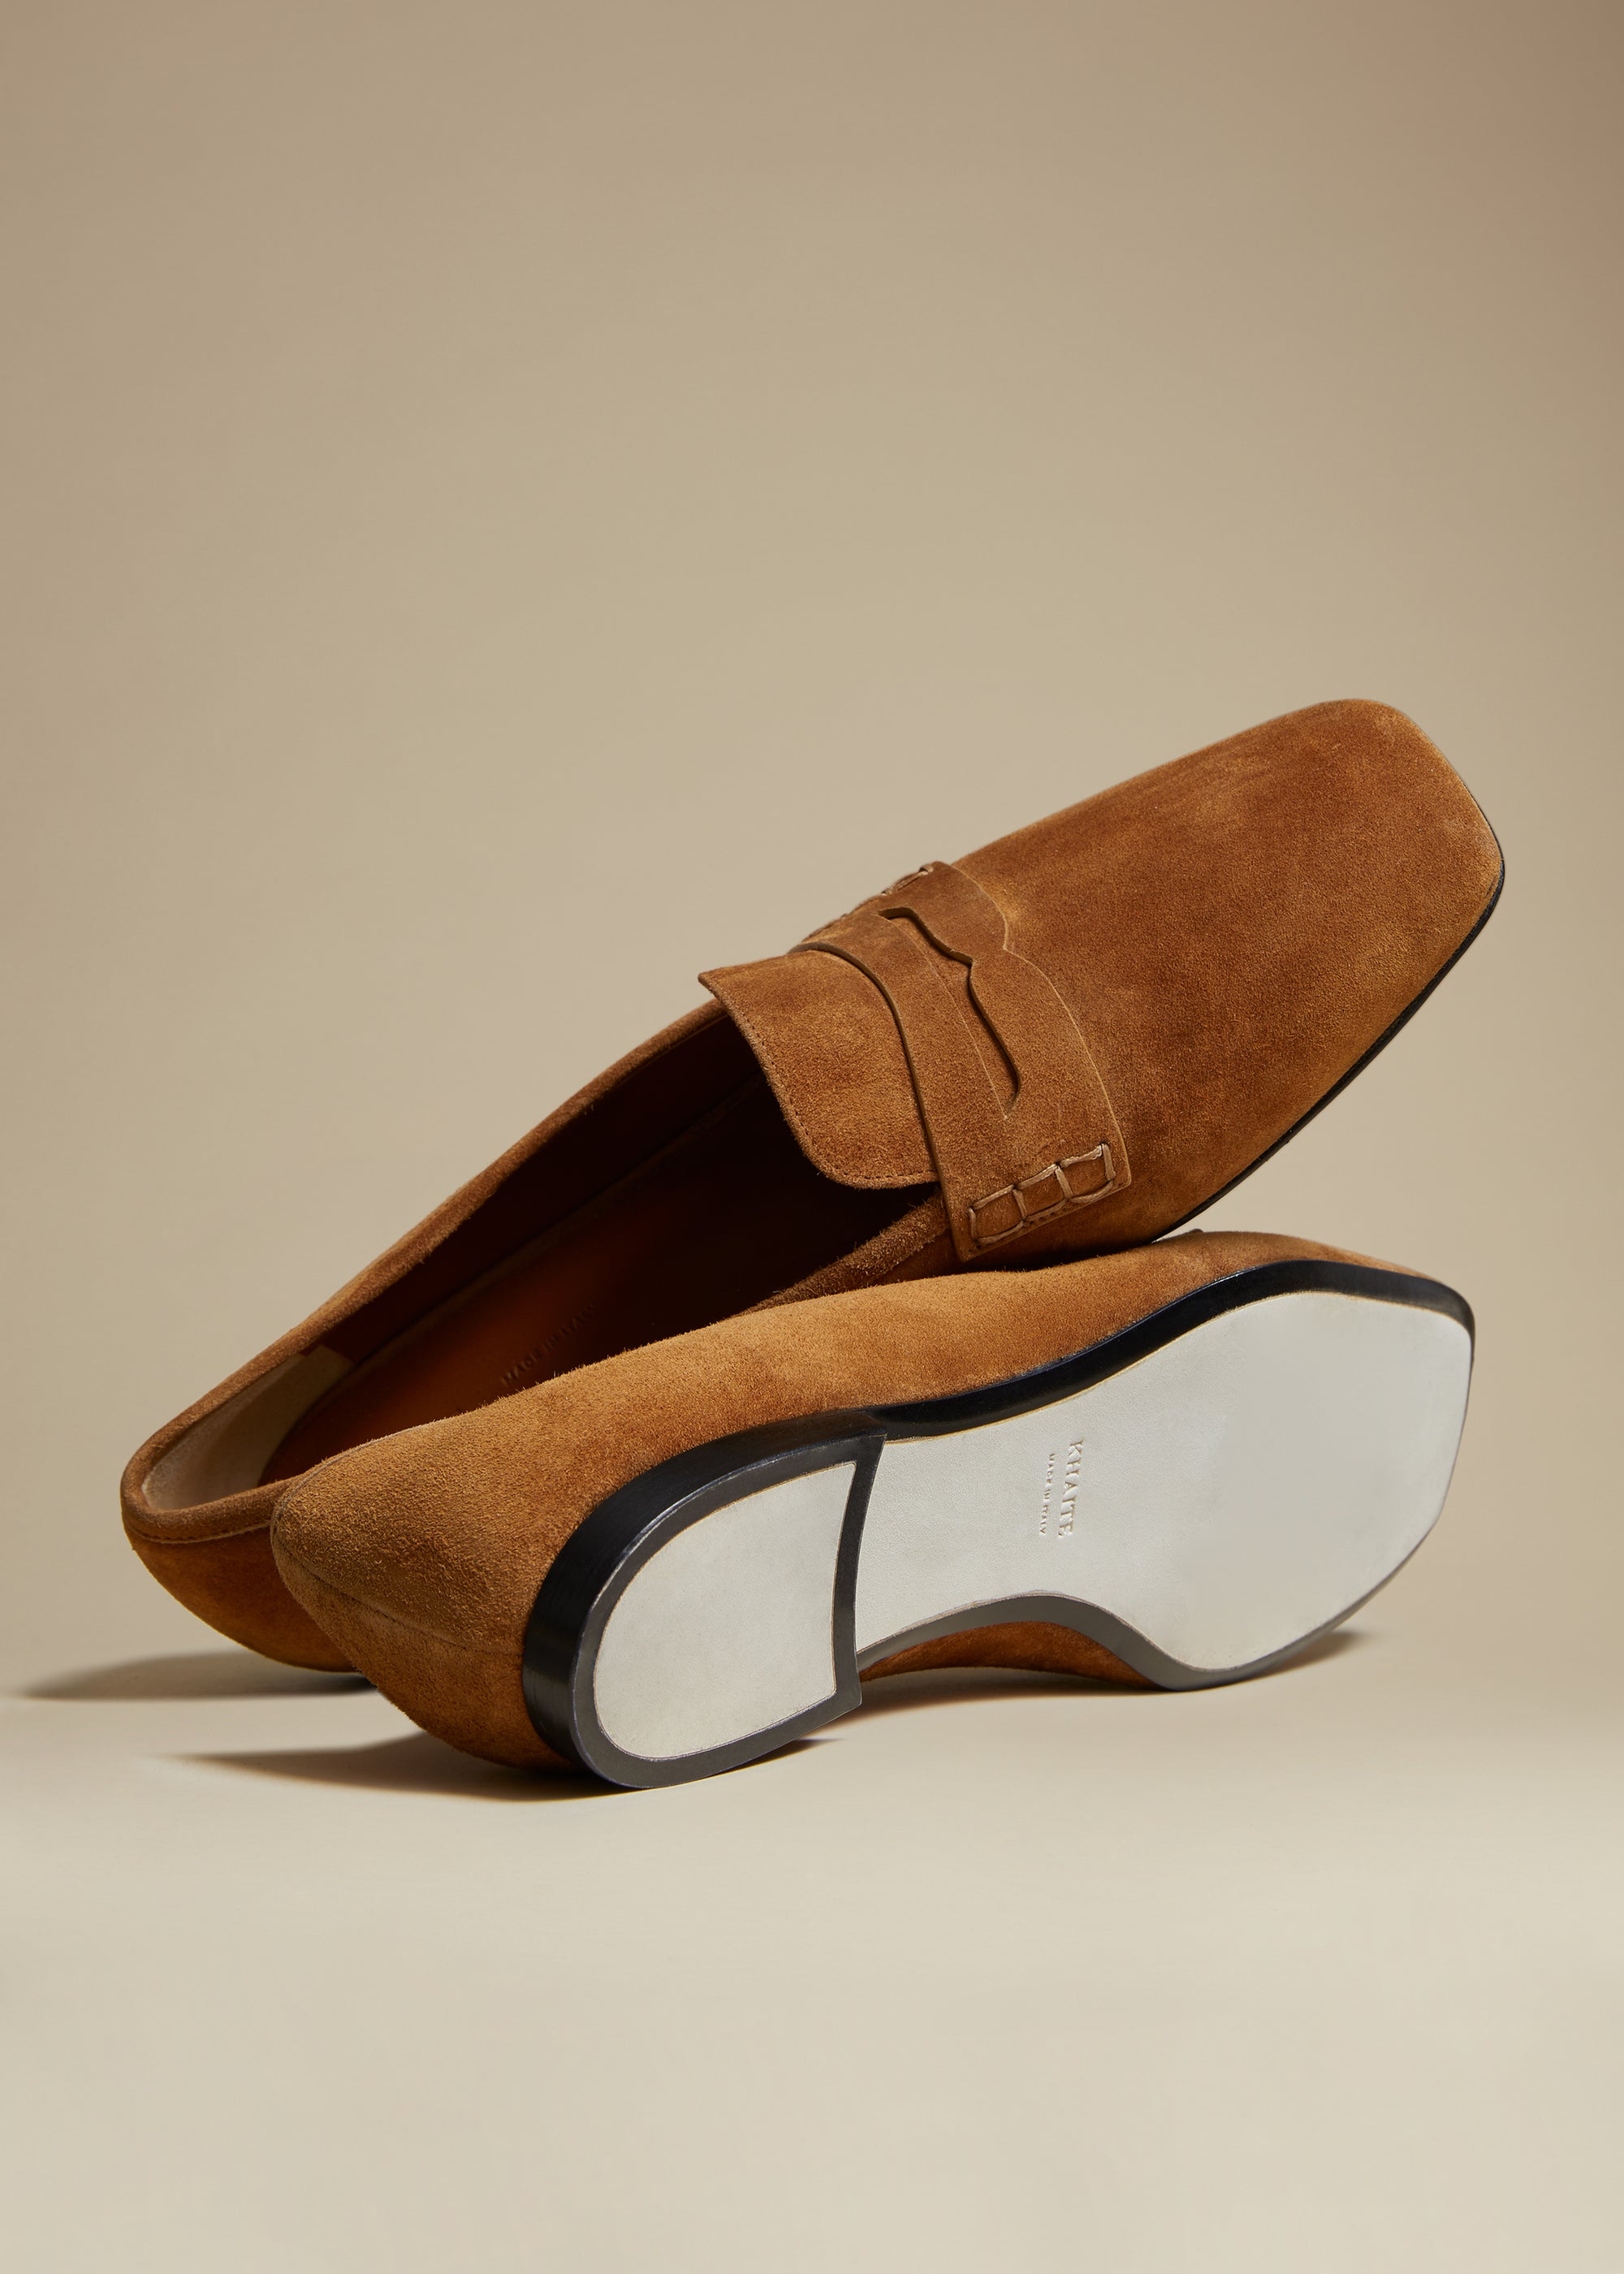 Carlisle loafer in leather - Caramel